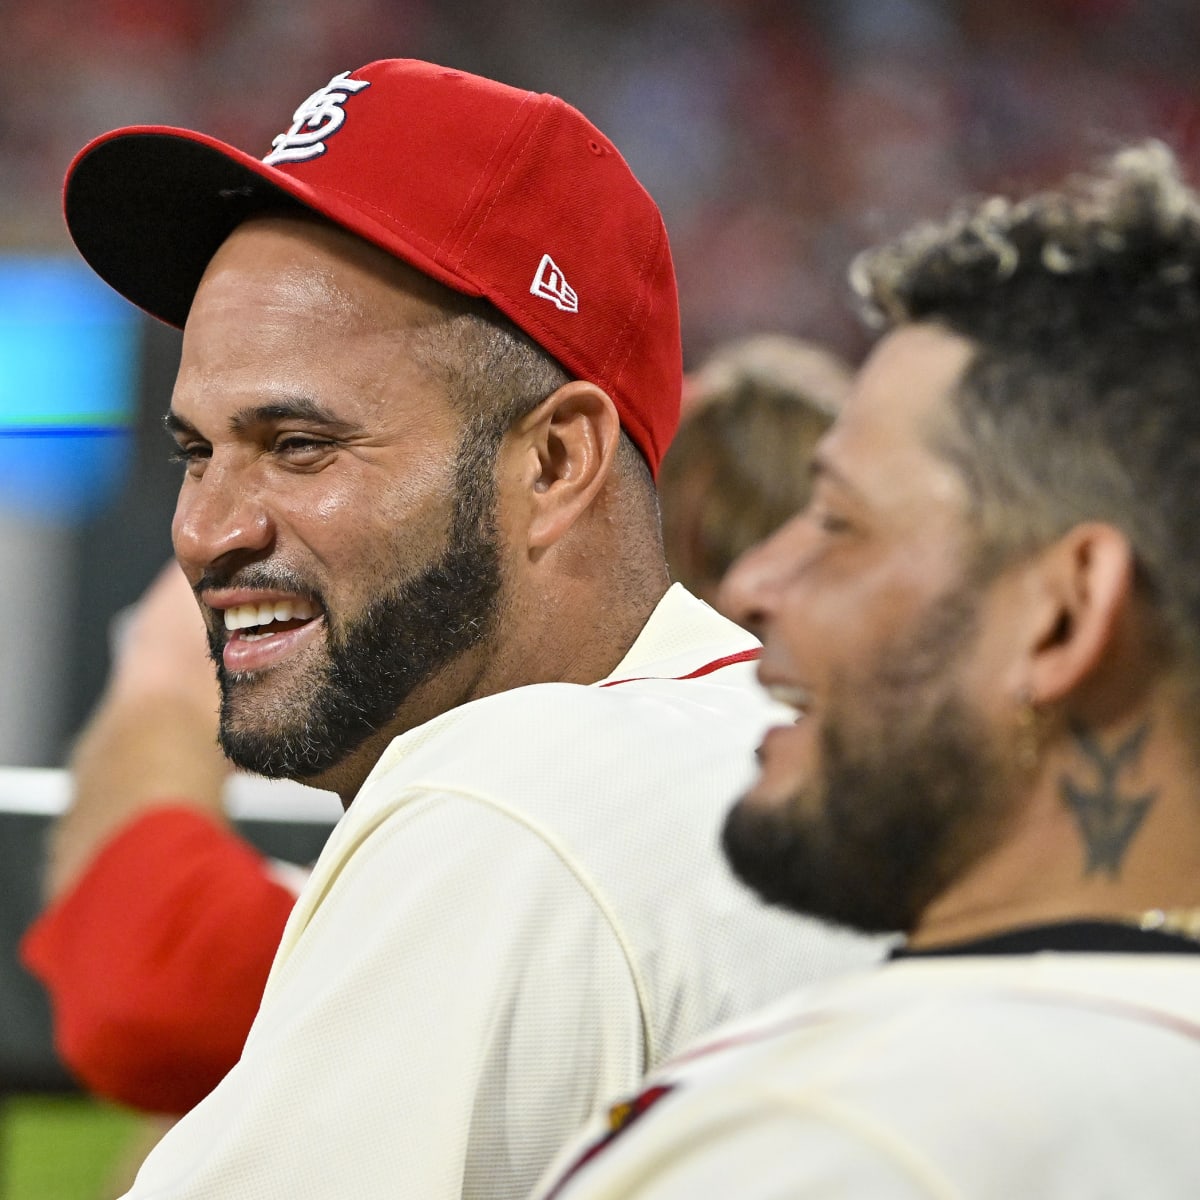 Albert Pujols: Gives and gets gifts at Wrigley Field